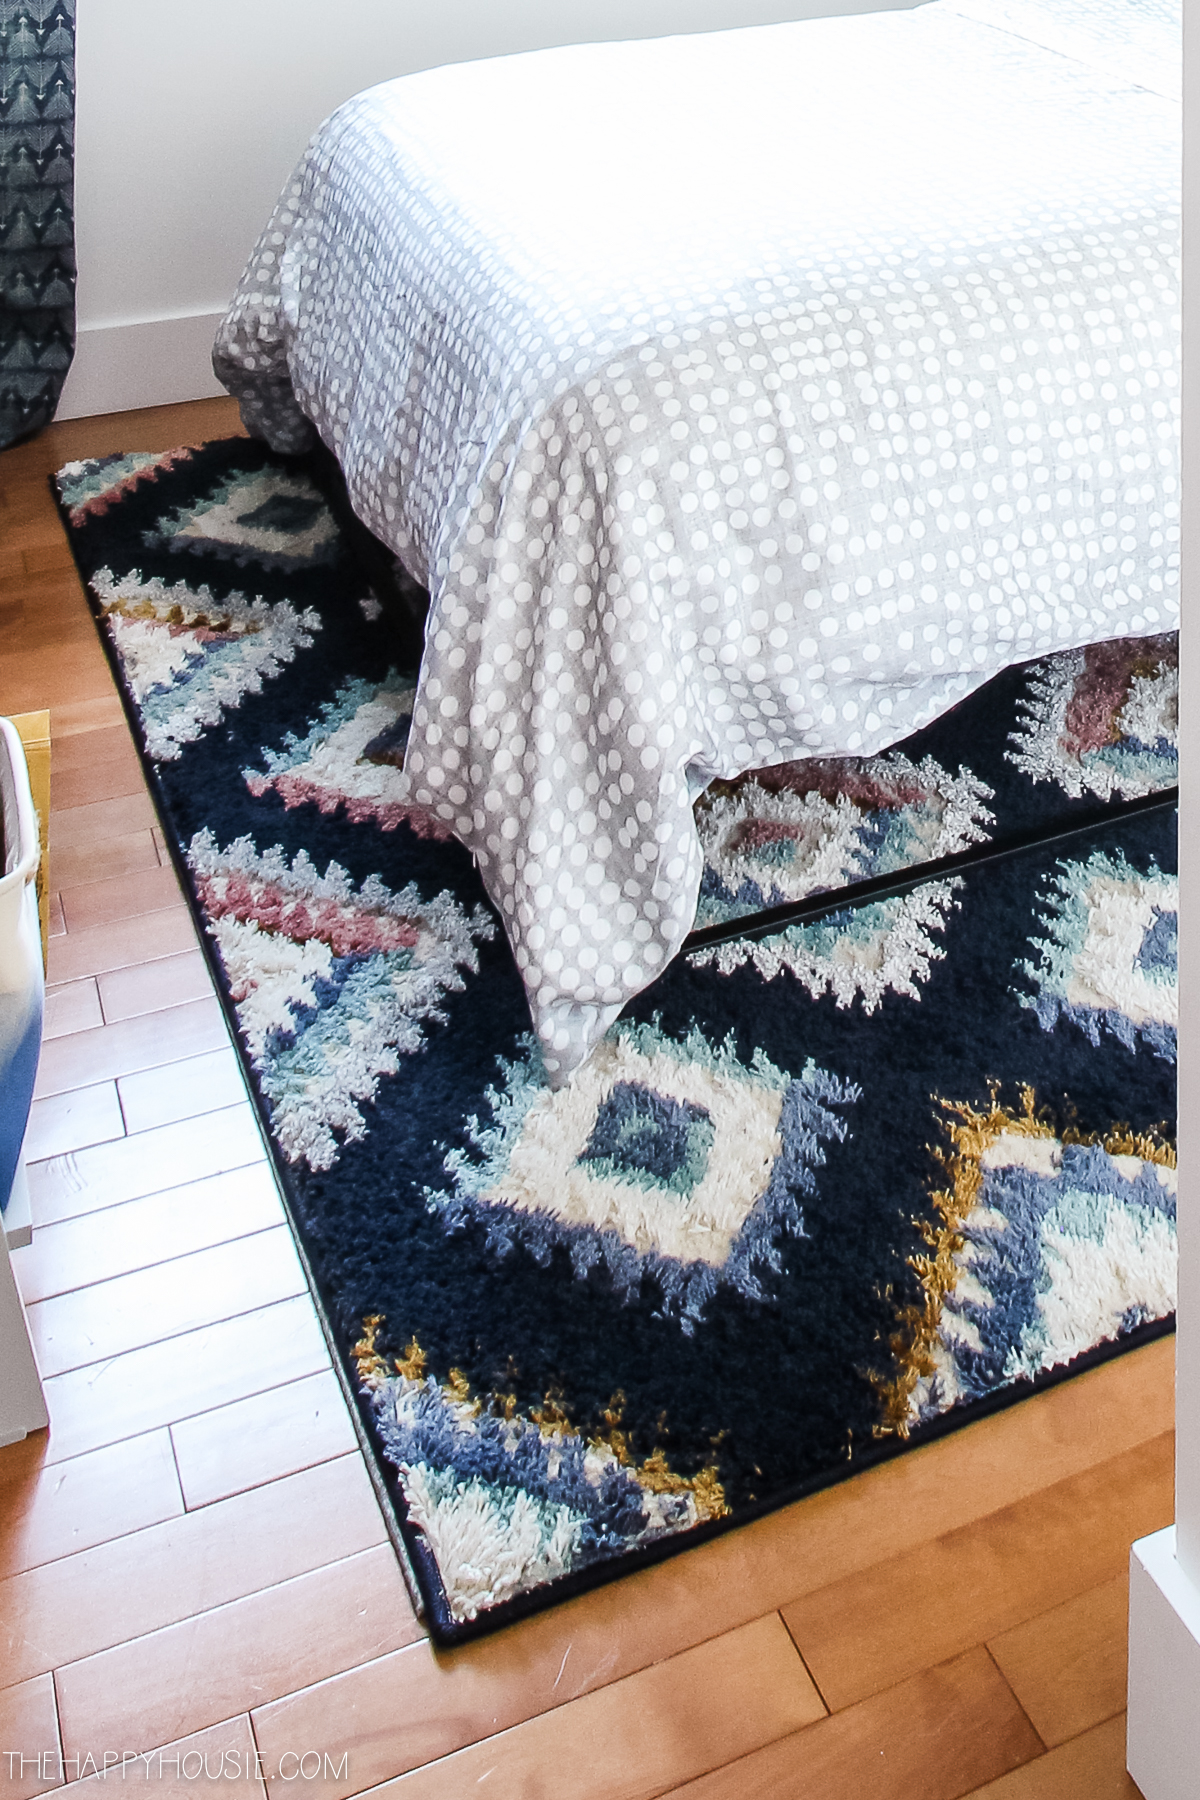 A multi coloured area rug is underneath the bed.